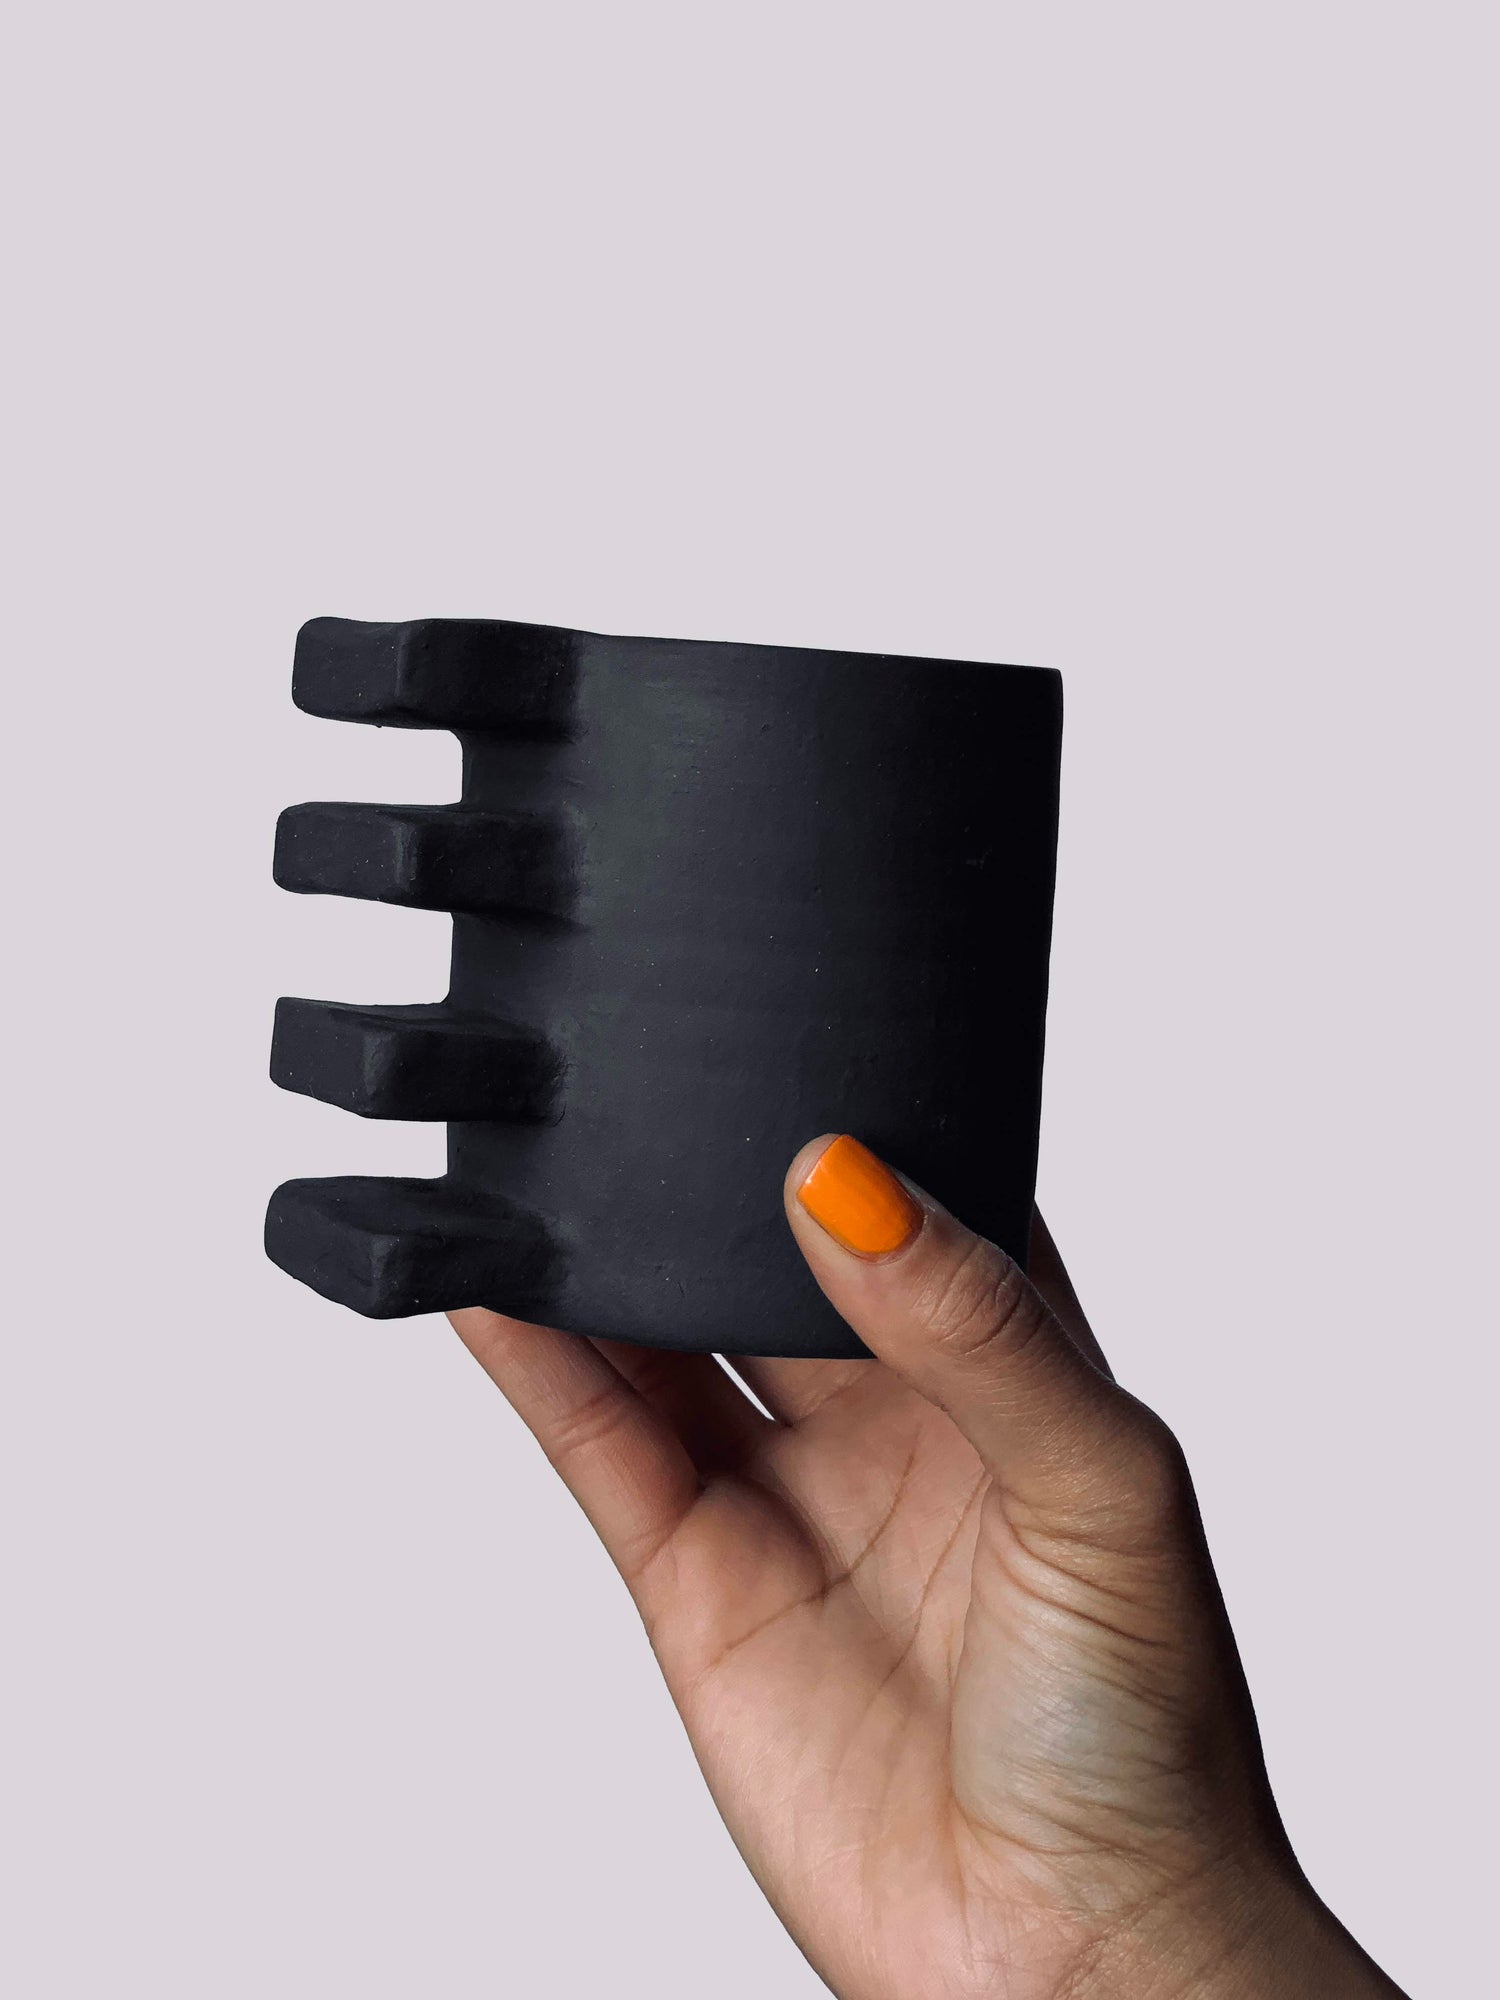 Black matte stoneware ceramic mug with four extended rectangles as the handle.